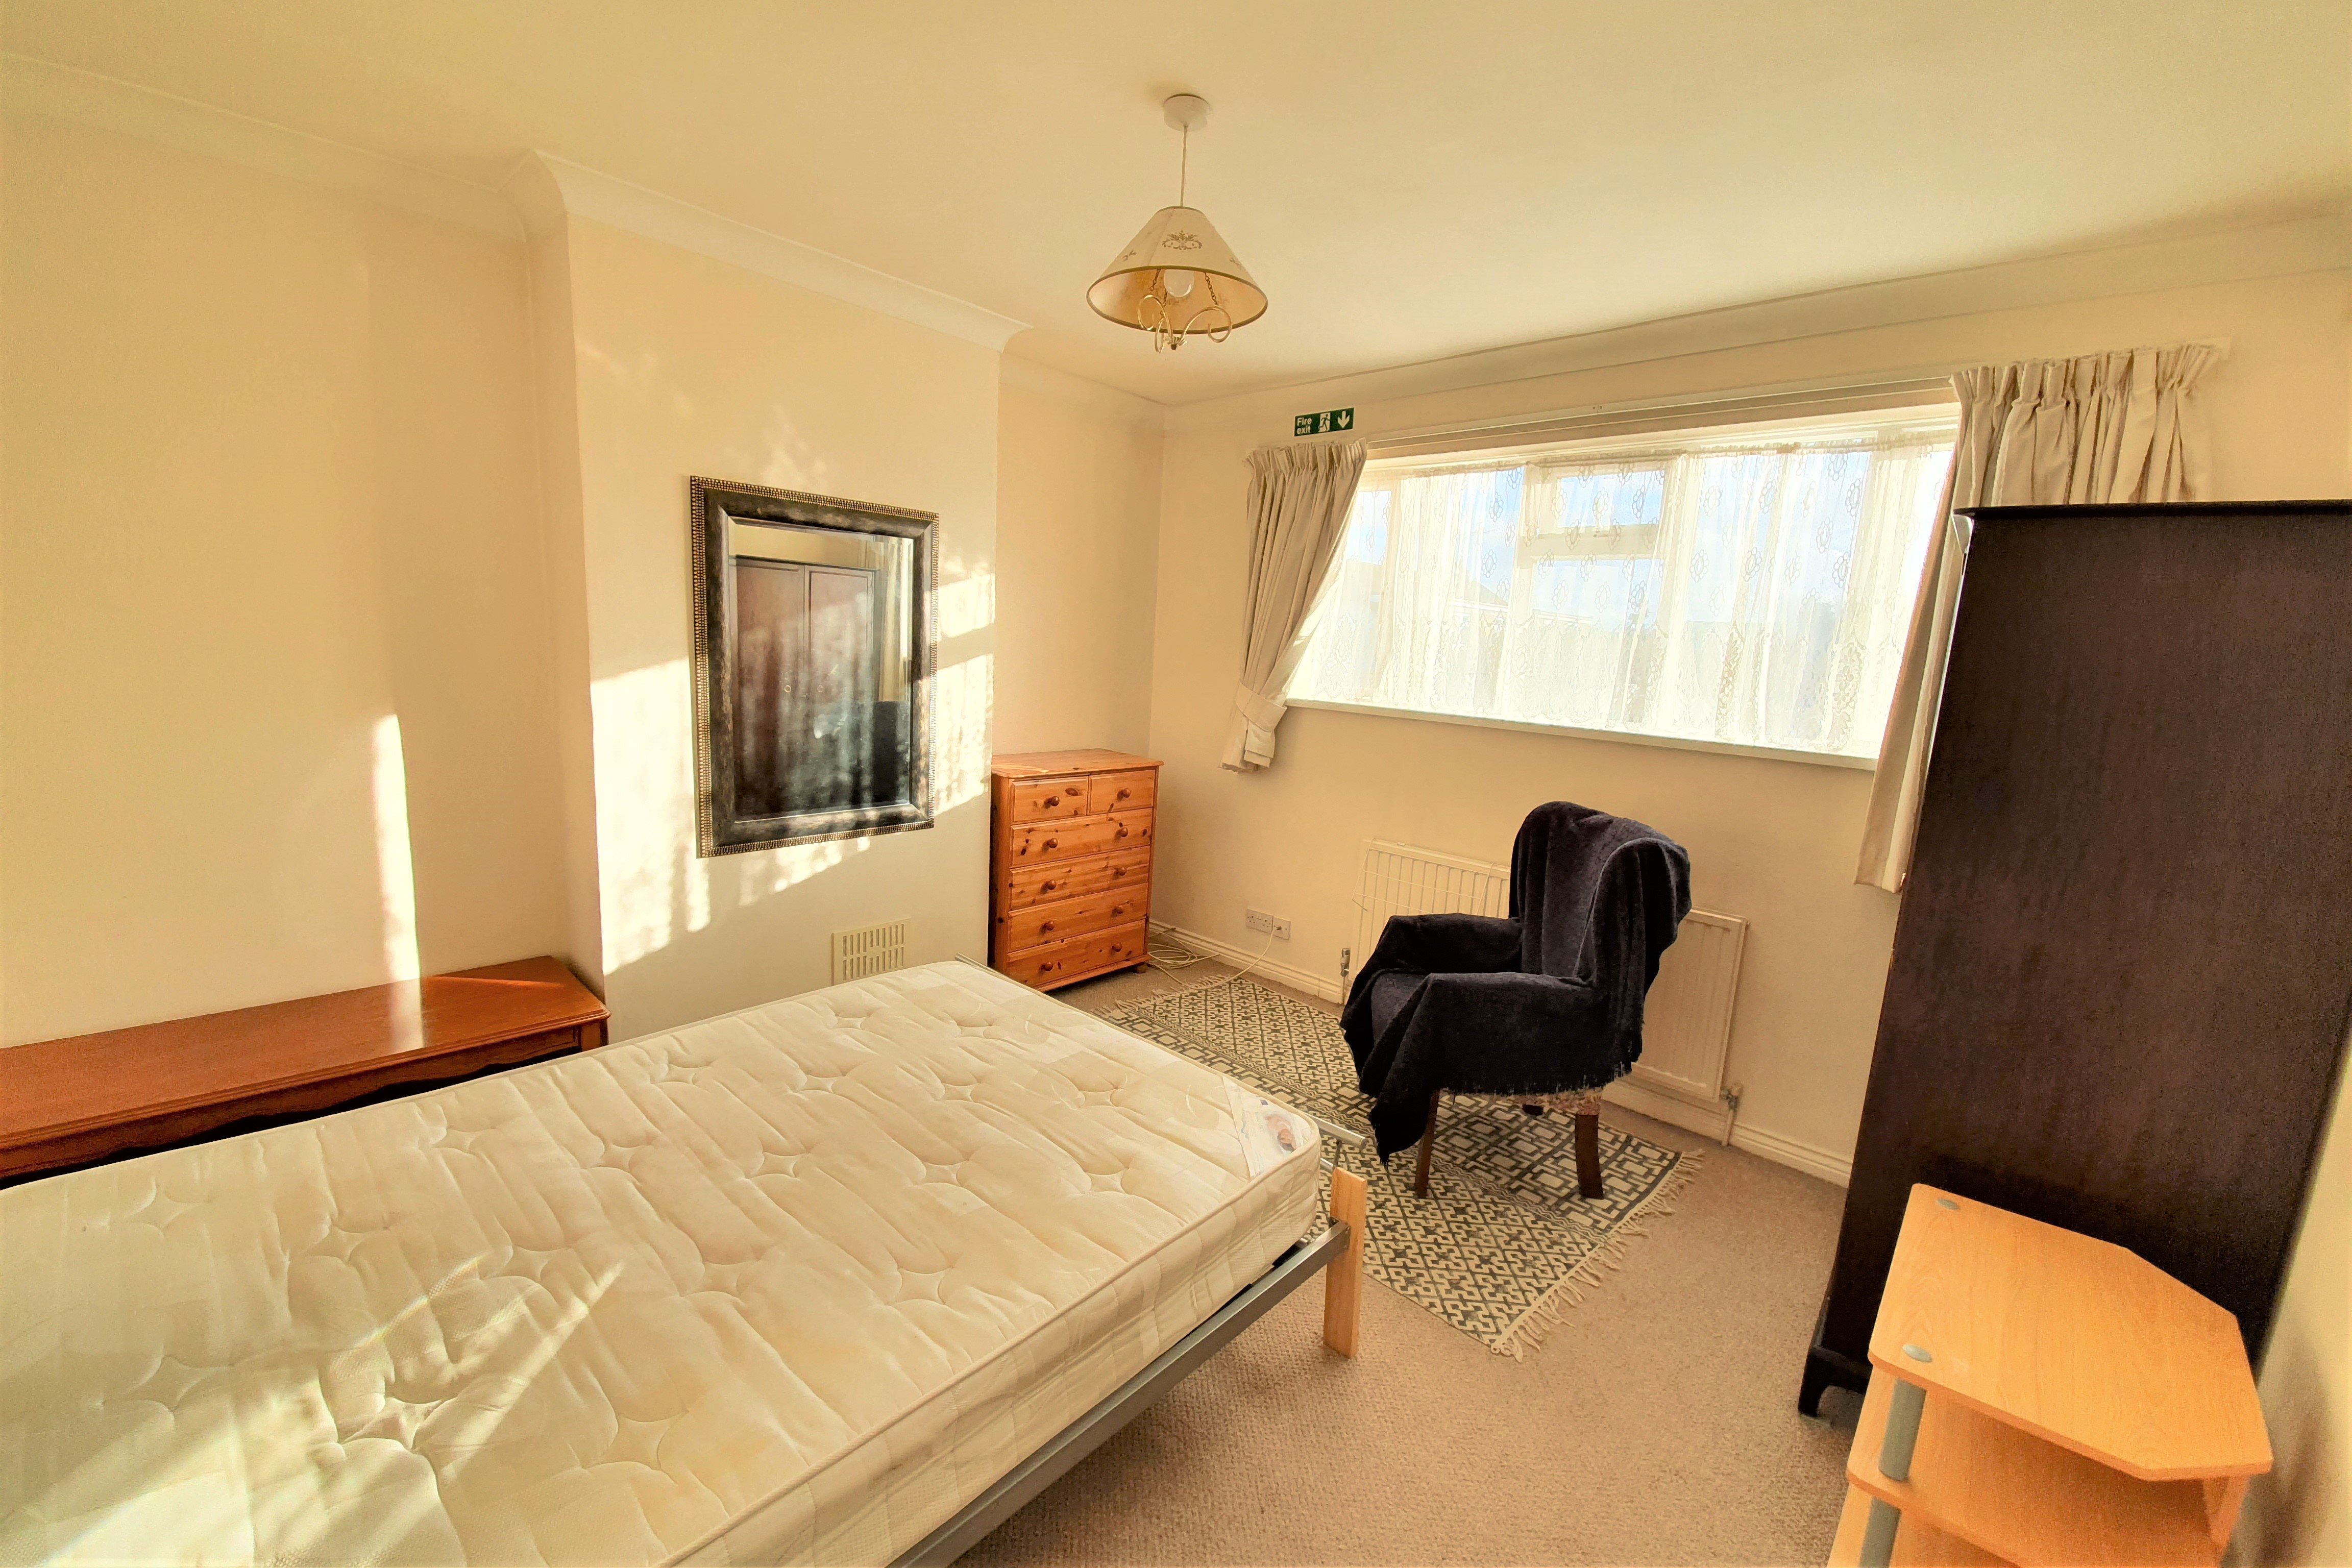 1 bed house / flat share to rent in Church Road (Bedroom 4), Rayleigh, SS6 